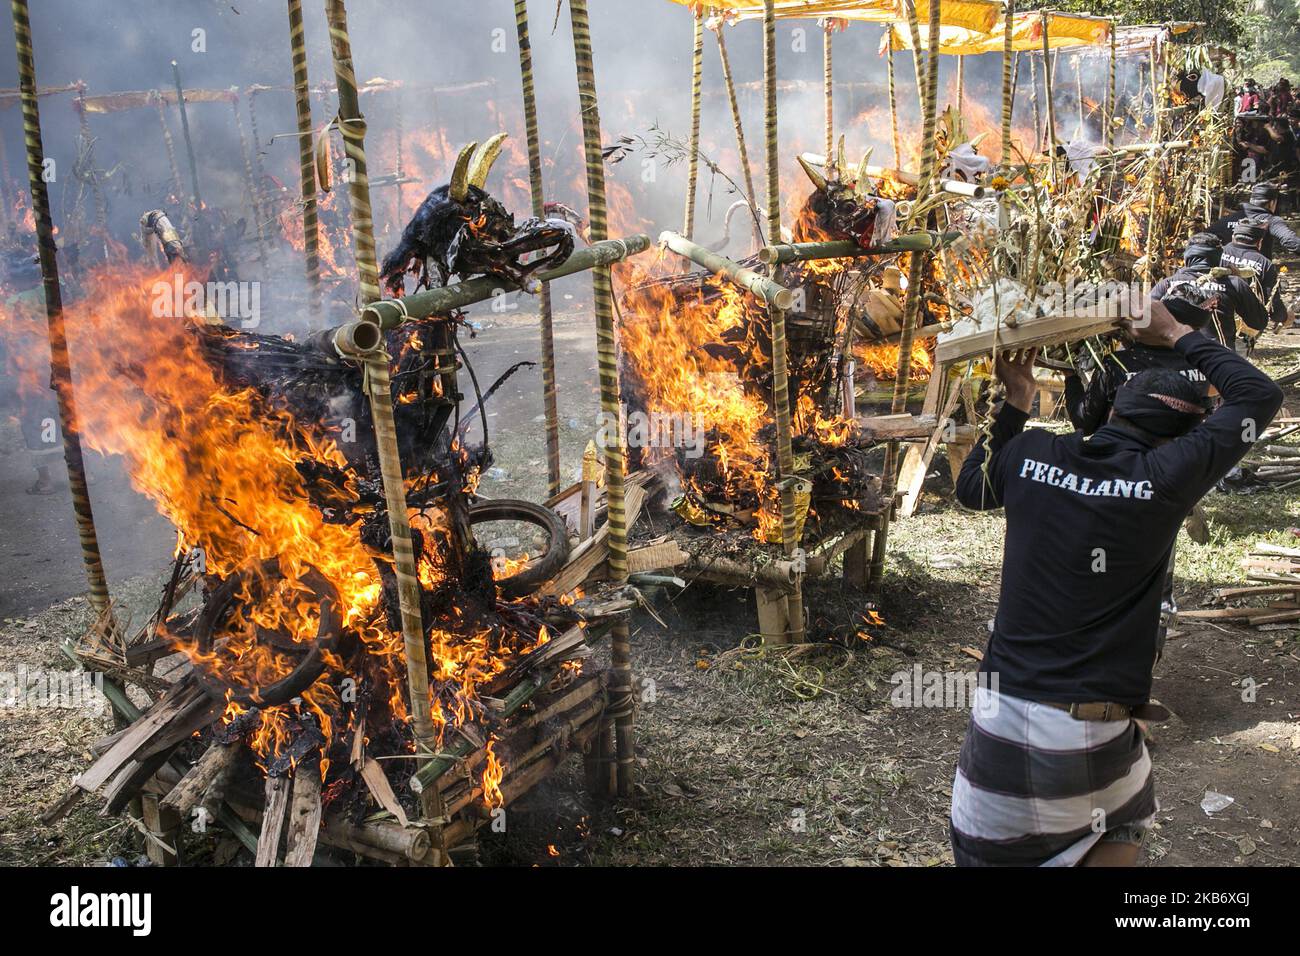 Coffin in shape of mythical dragon and bull being burnt during mass cremation or locally called Ngaben rituals in the grave yard of Bayad Village in Tegallalang, Gianyar, Bali on September 25, 2019. A total of 59 bodies in the form of human skeletons that died several years ago were cremated simultaneously in order to ease the cost of the ceremony for local residents. (Photo by Johanes Christo/NurPhoto) Stock Photo